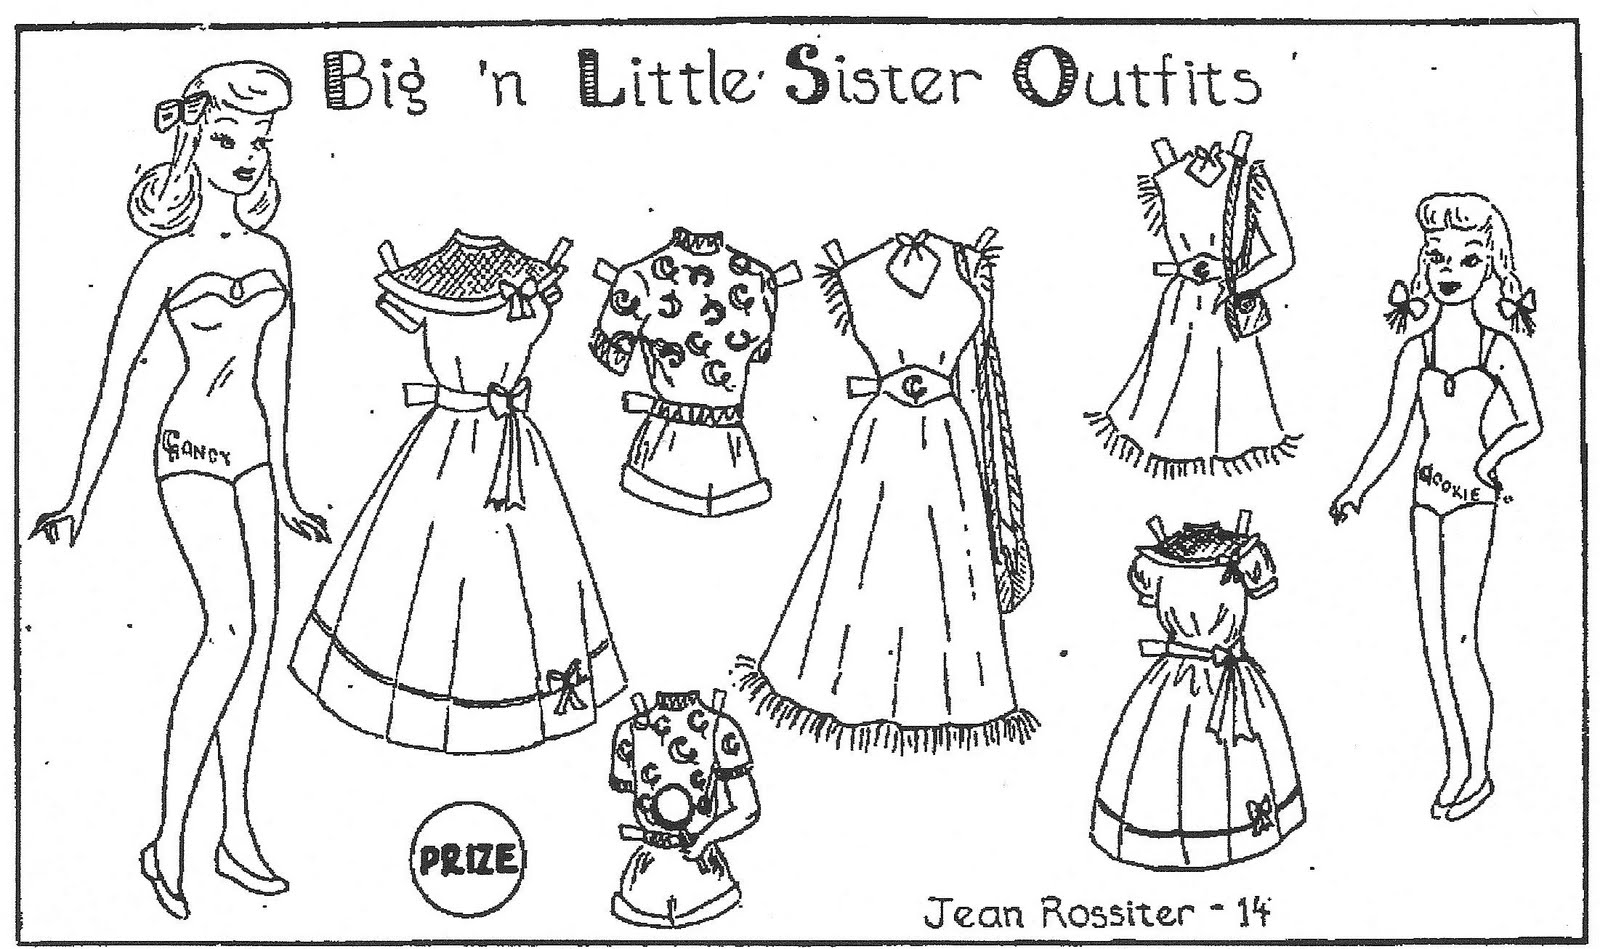 Big n Little Sister Outfits 1952